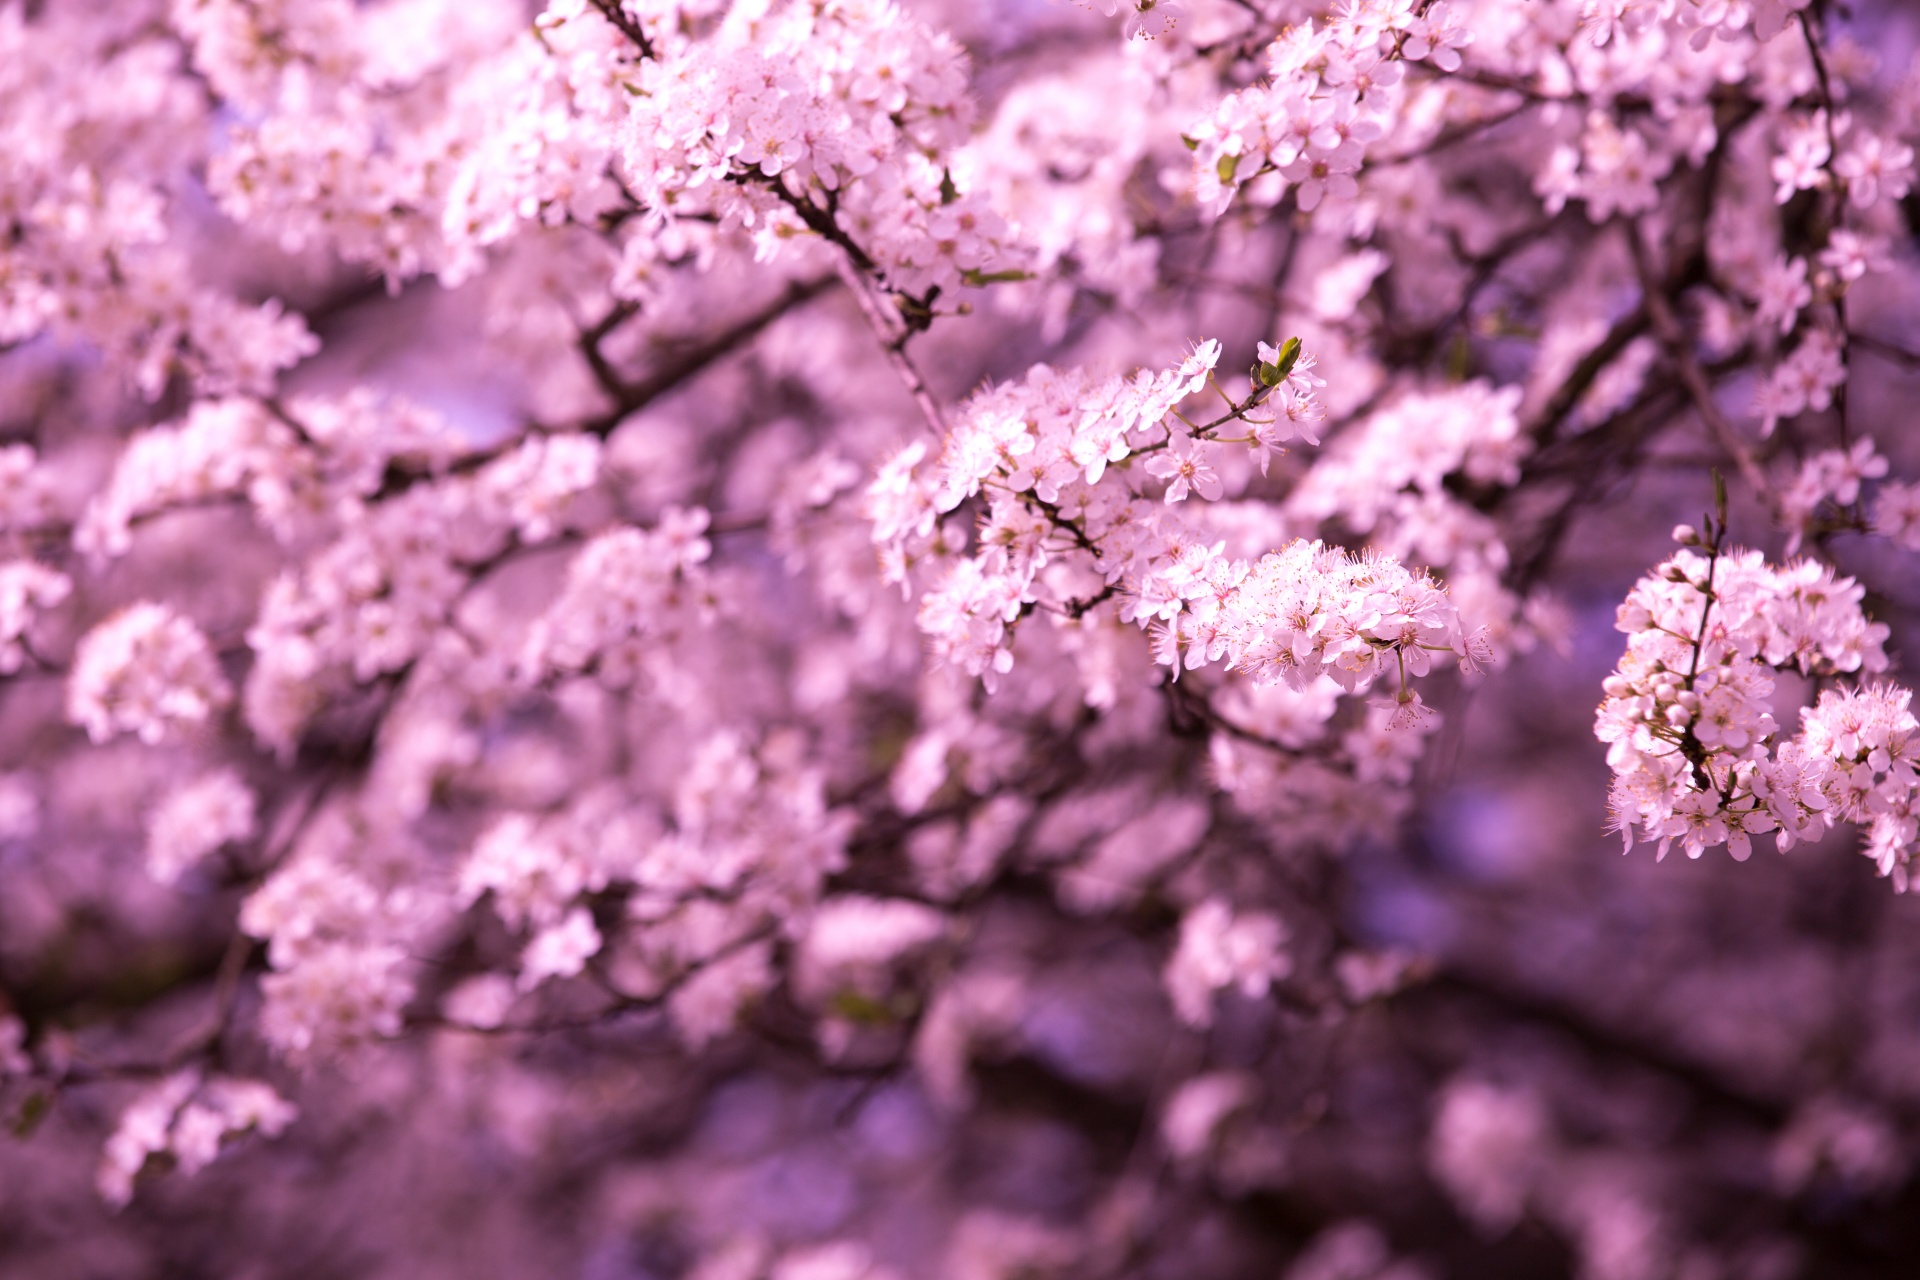 spring flowers background free photo